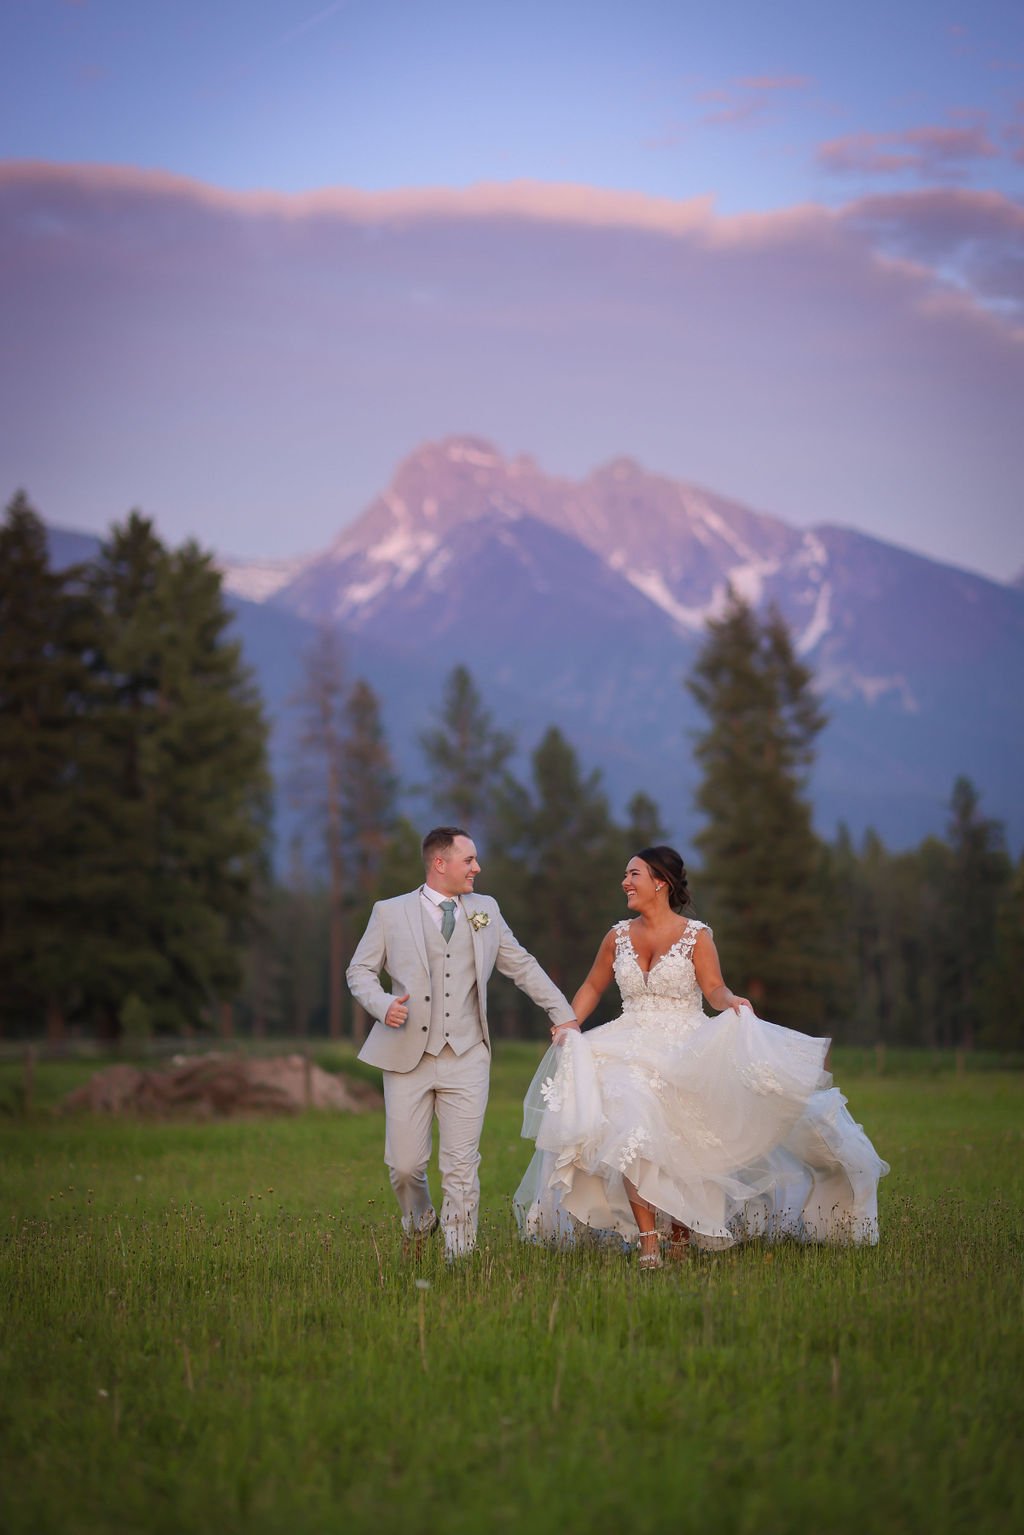 Montana wedding at the silver knot with mountains in background.jpg